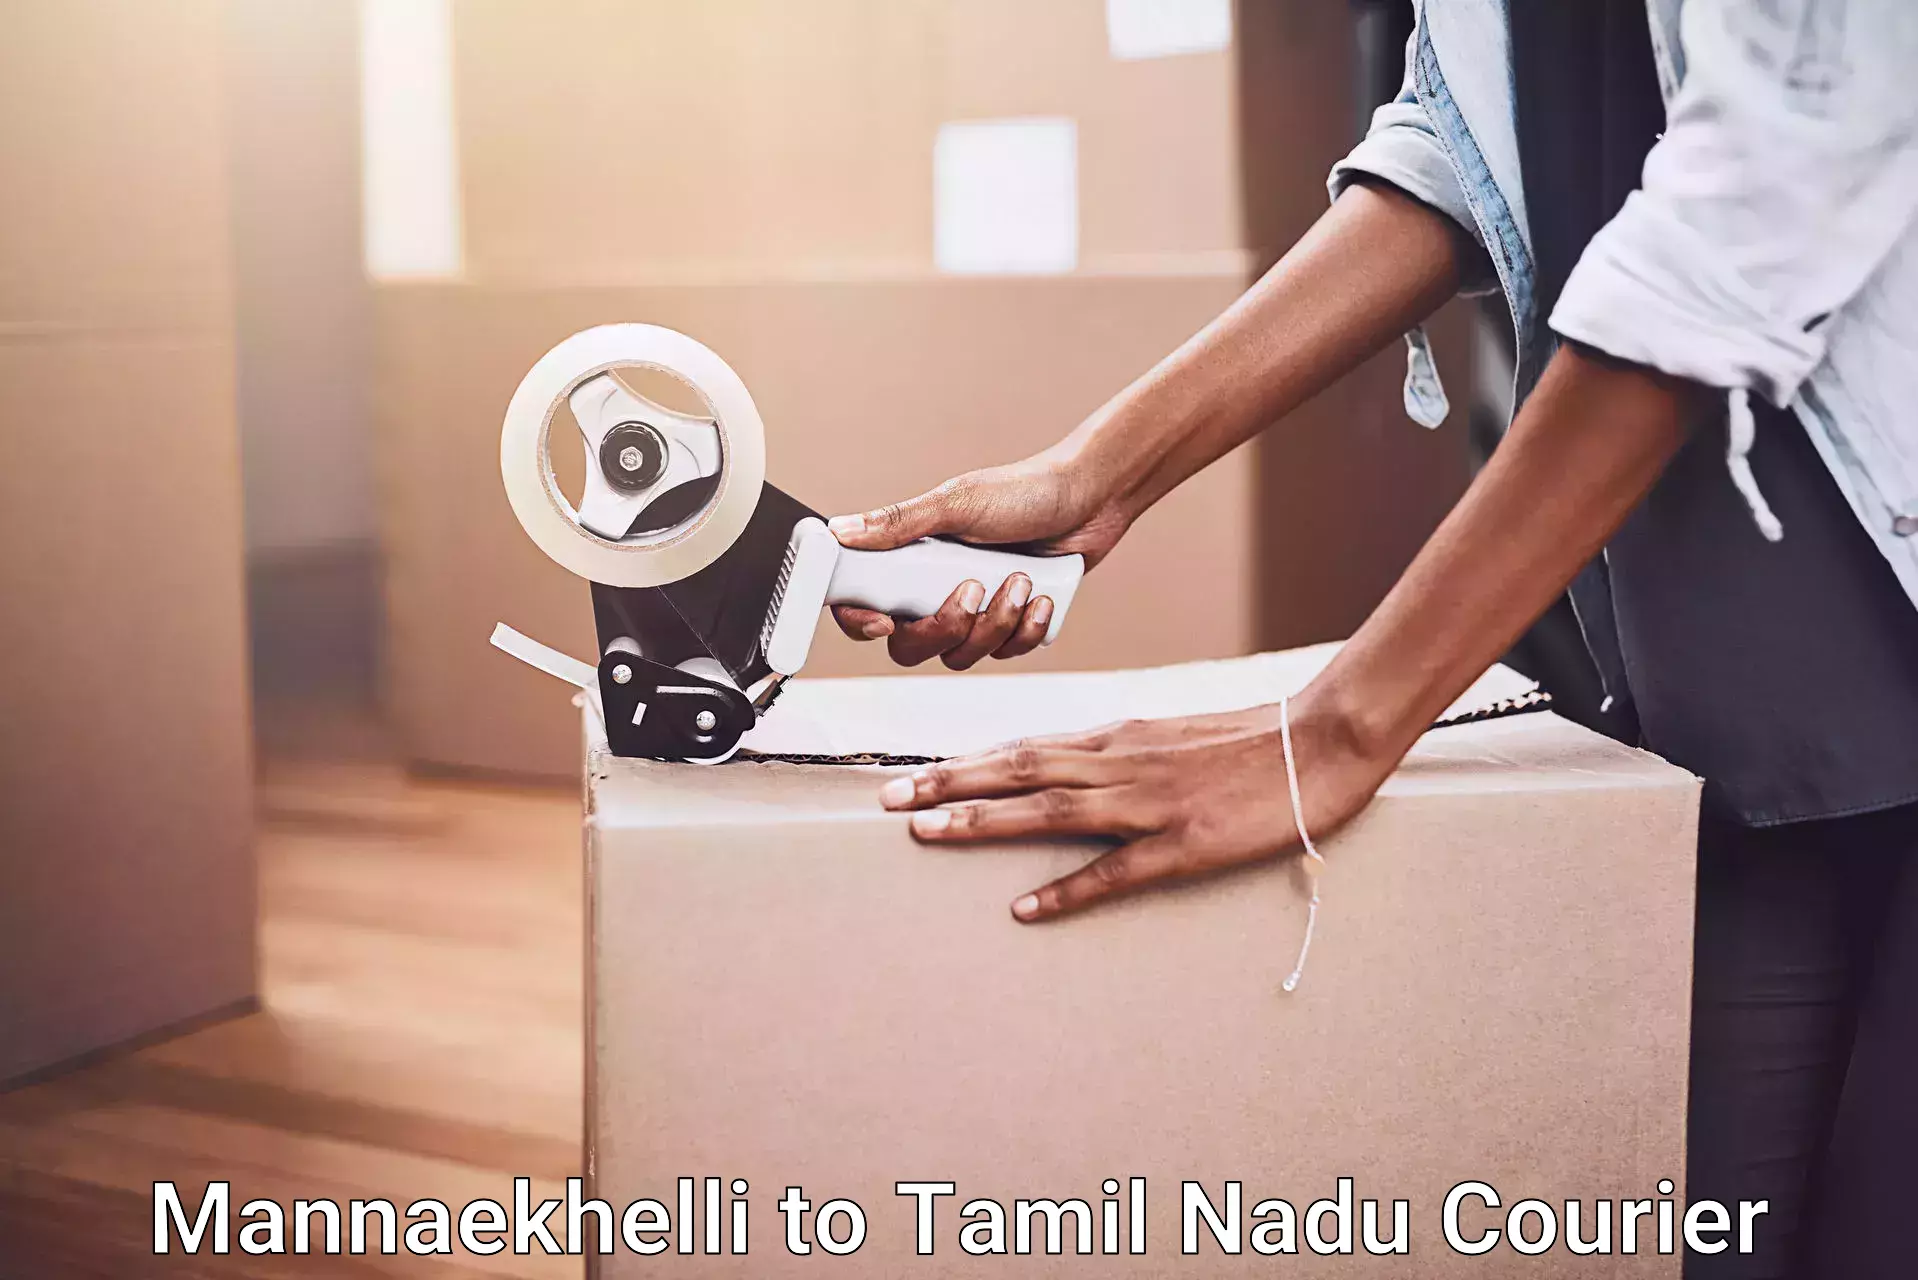 Affordable moving services Mannaekhelli to Shanmugha Arts Science Technology and Research Academy Thanjavur